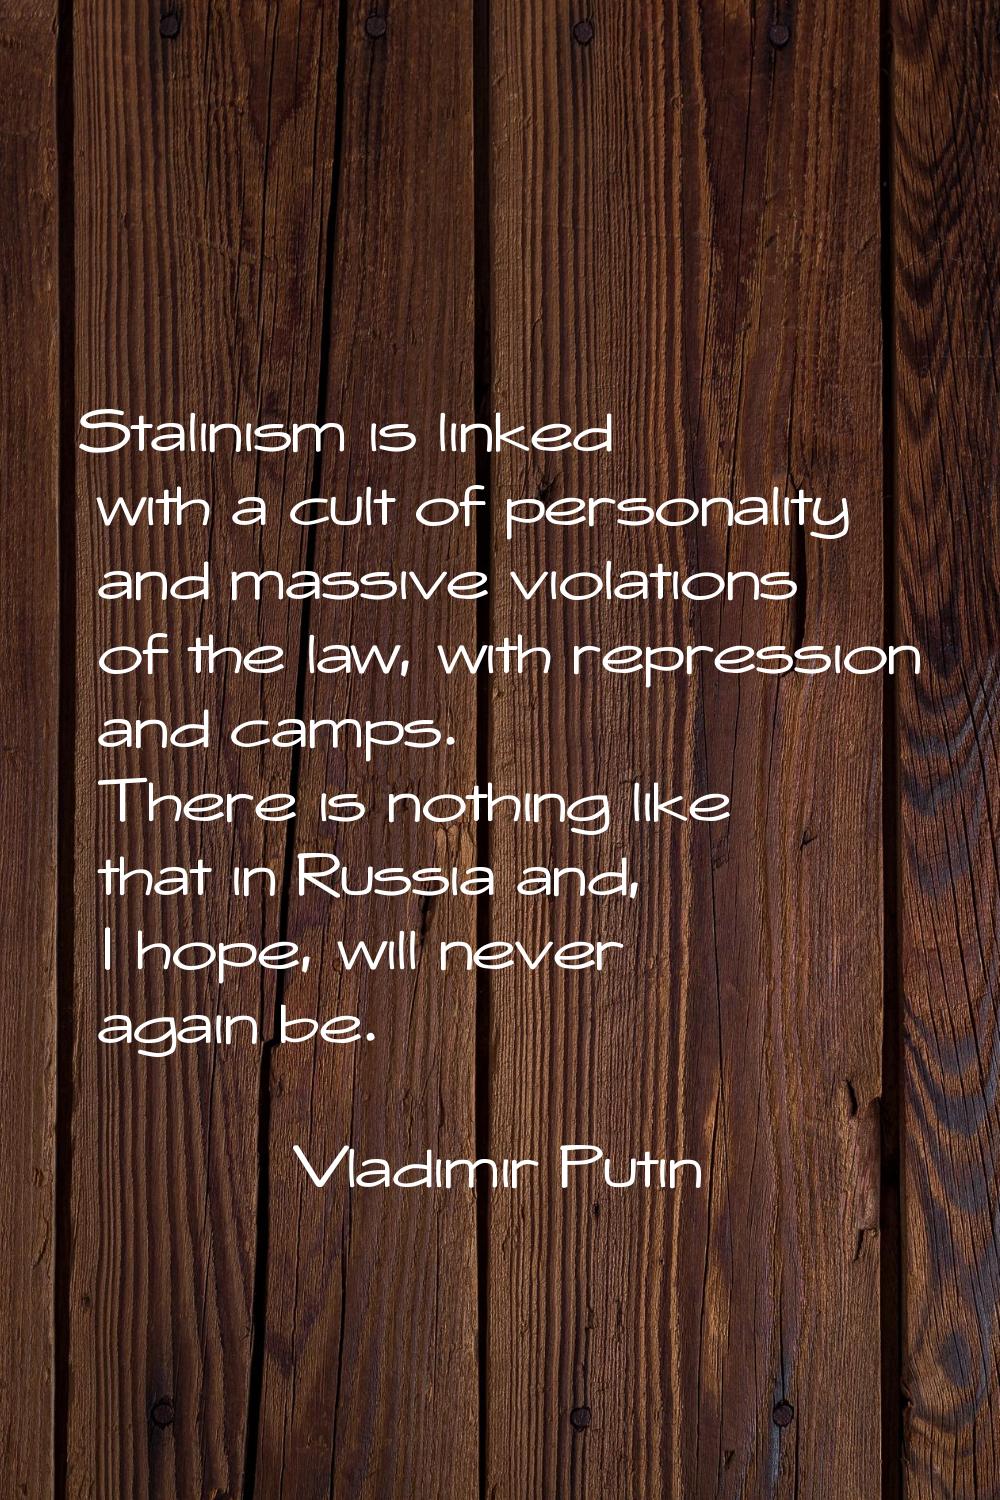 Stalinism is linked with a cult of personality and massive violations of the law, with repression a